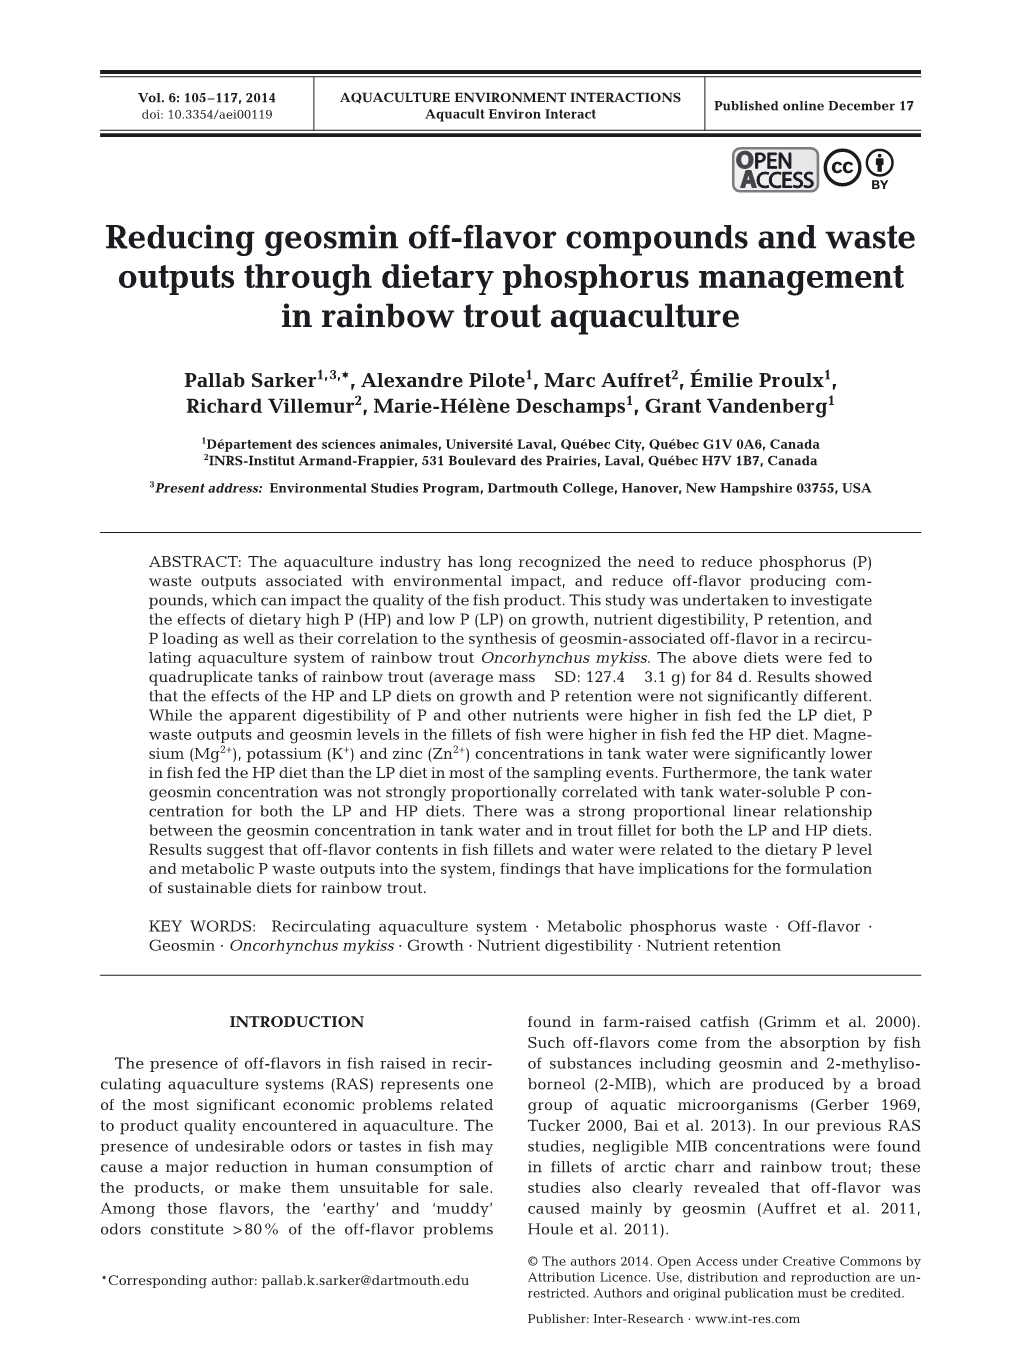 Reducing Geosmin Off-Flavor Compounds and Waste Outputs Through Dietary Phosphorus Management in Rainbow Trout Aquaculture